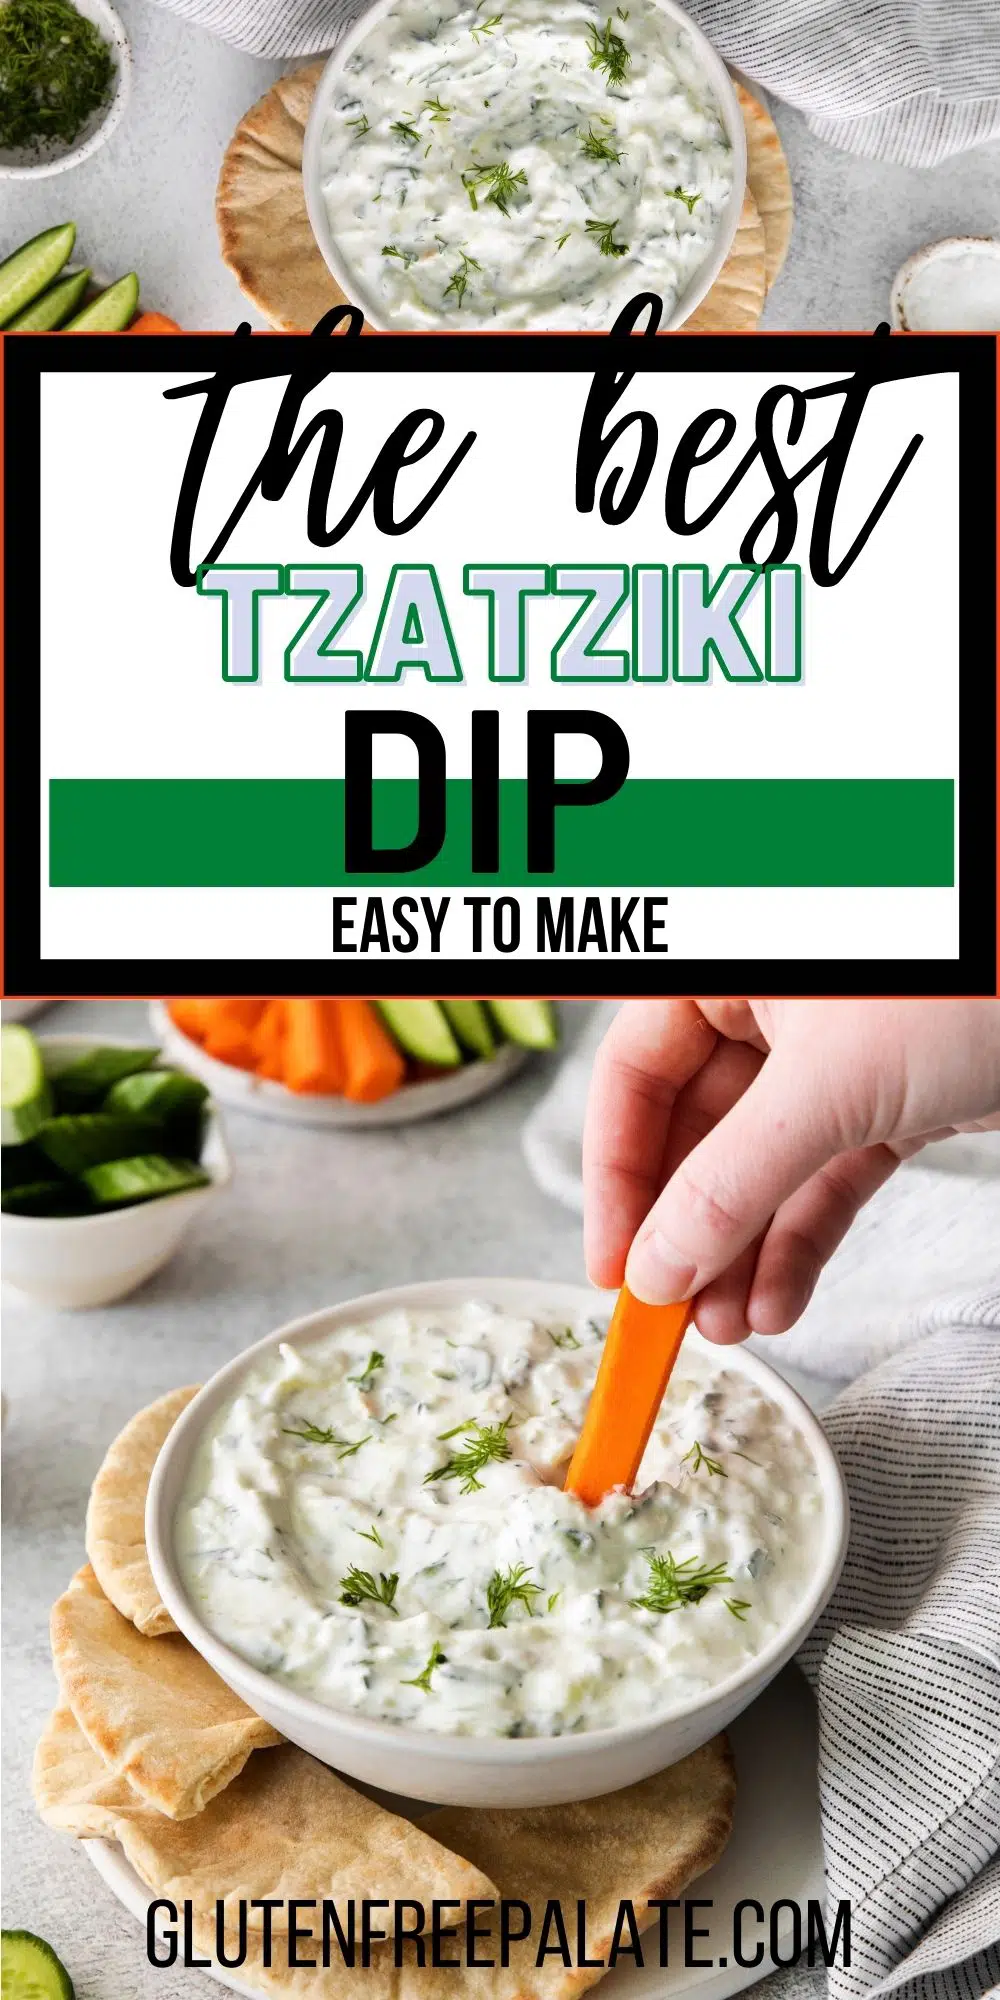 Images of homemade tzatziki dip. Text overlay says The Best Tzatziki Dip. Easy to Make